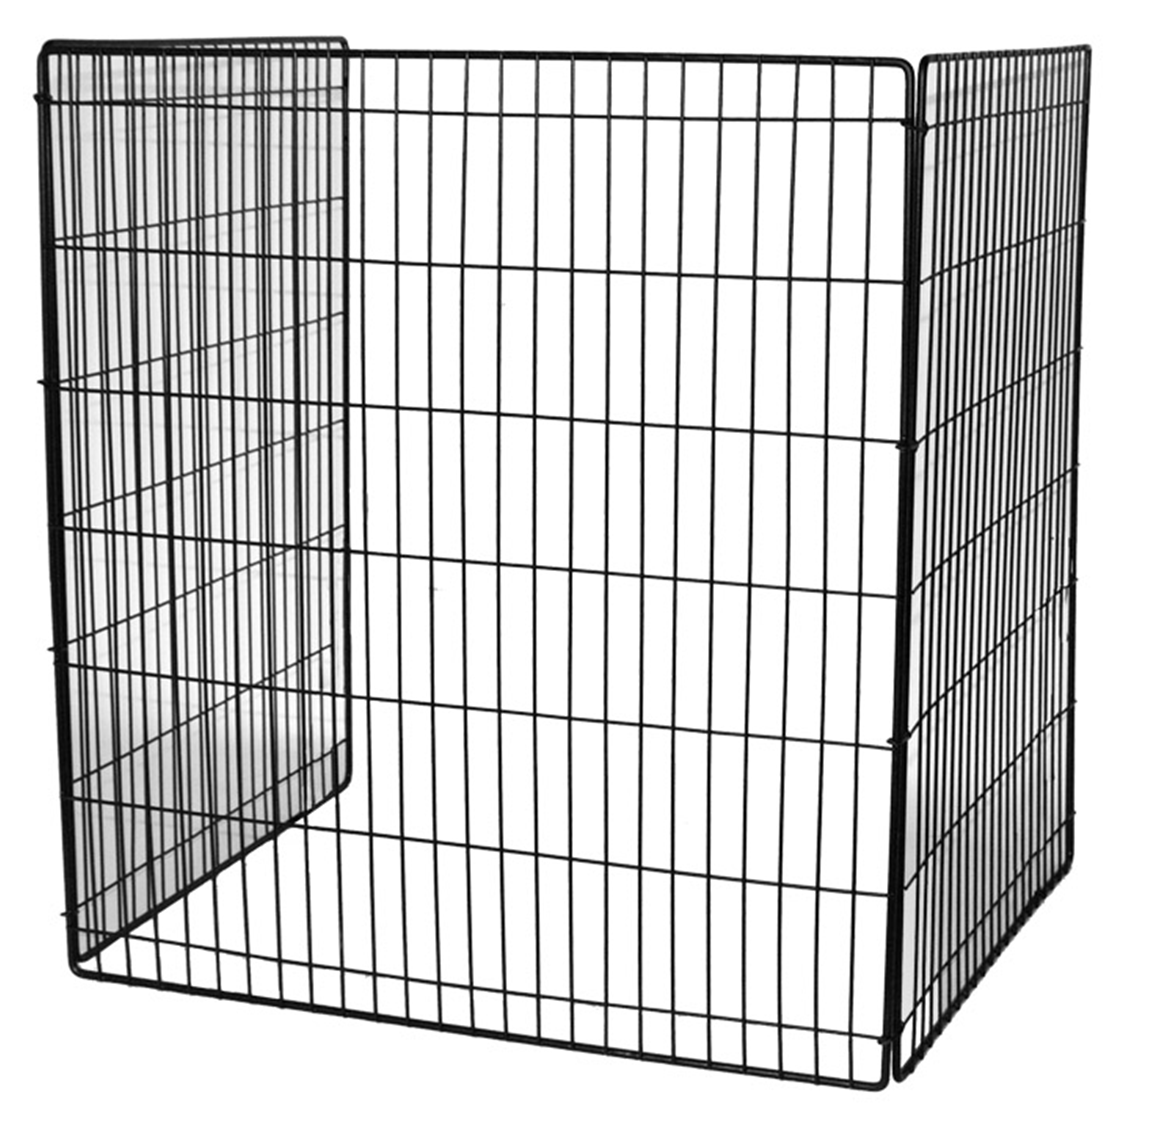 FPA021 125 x 60cm Black MESH Steel Heater Child Guard w gate Fire Safety Fence 